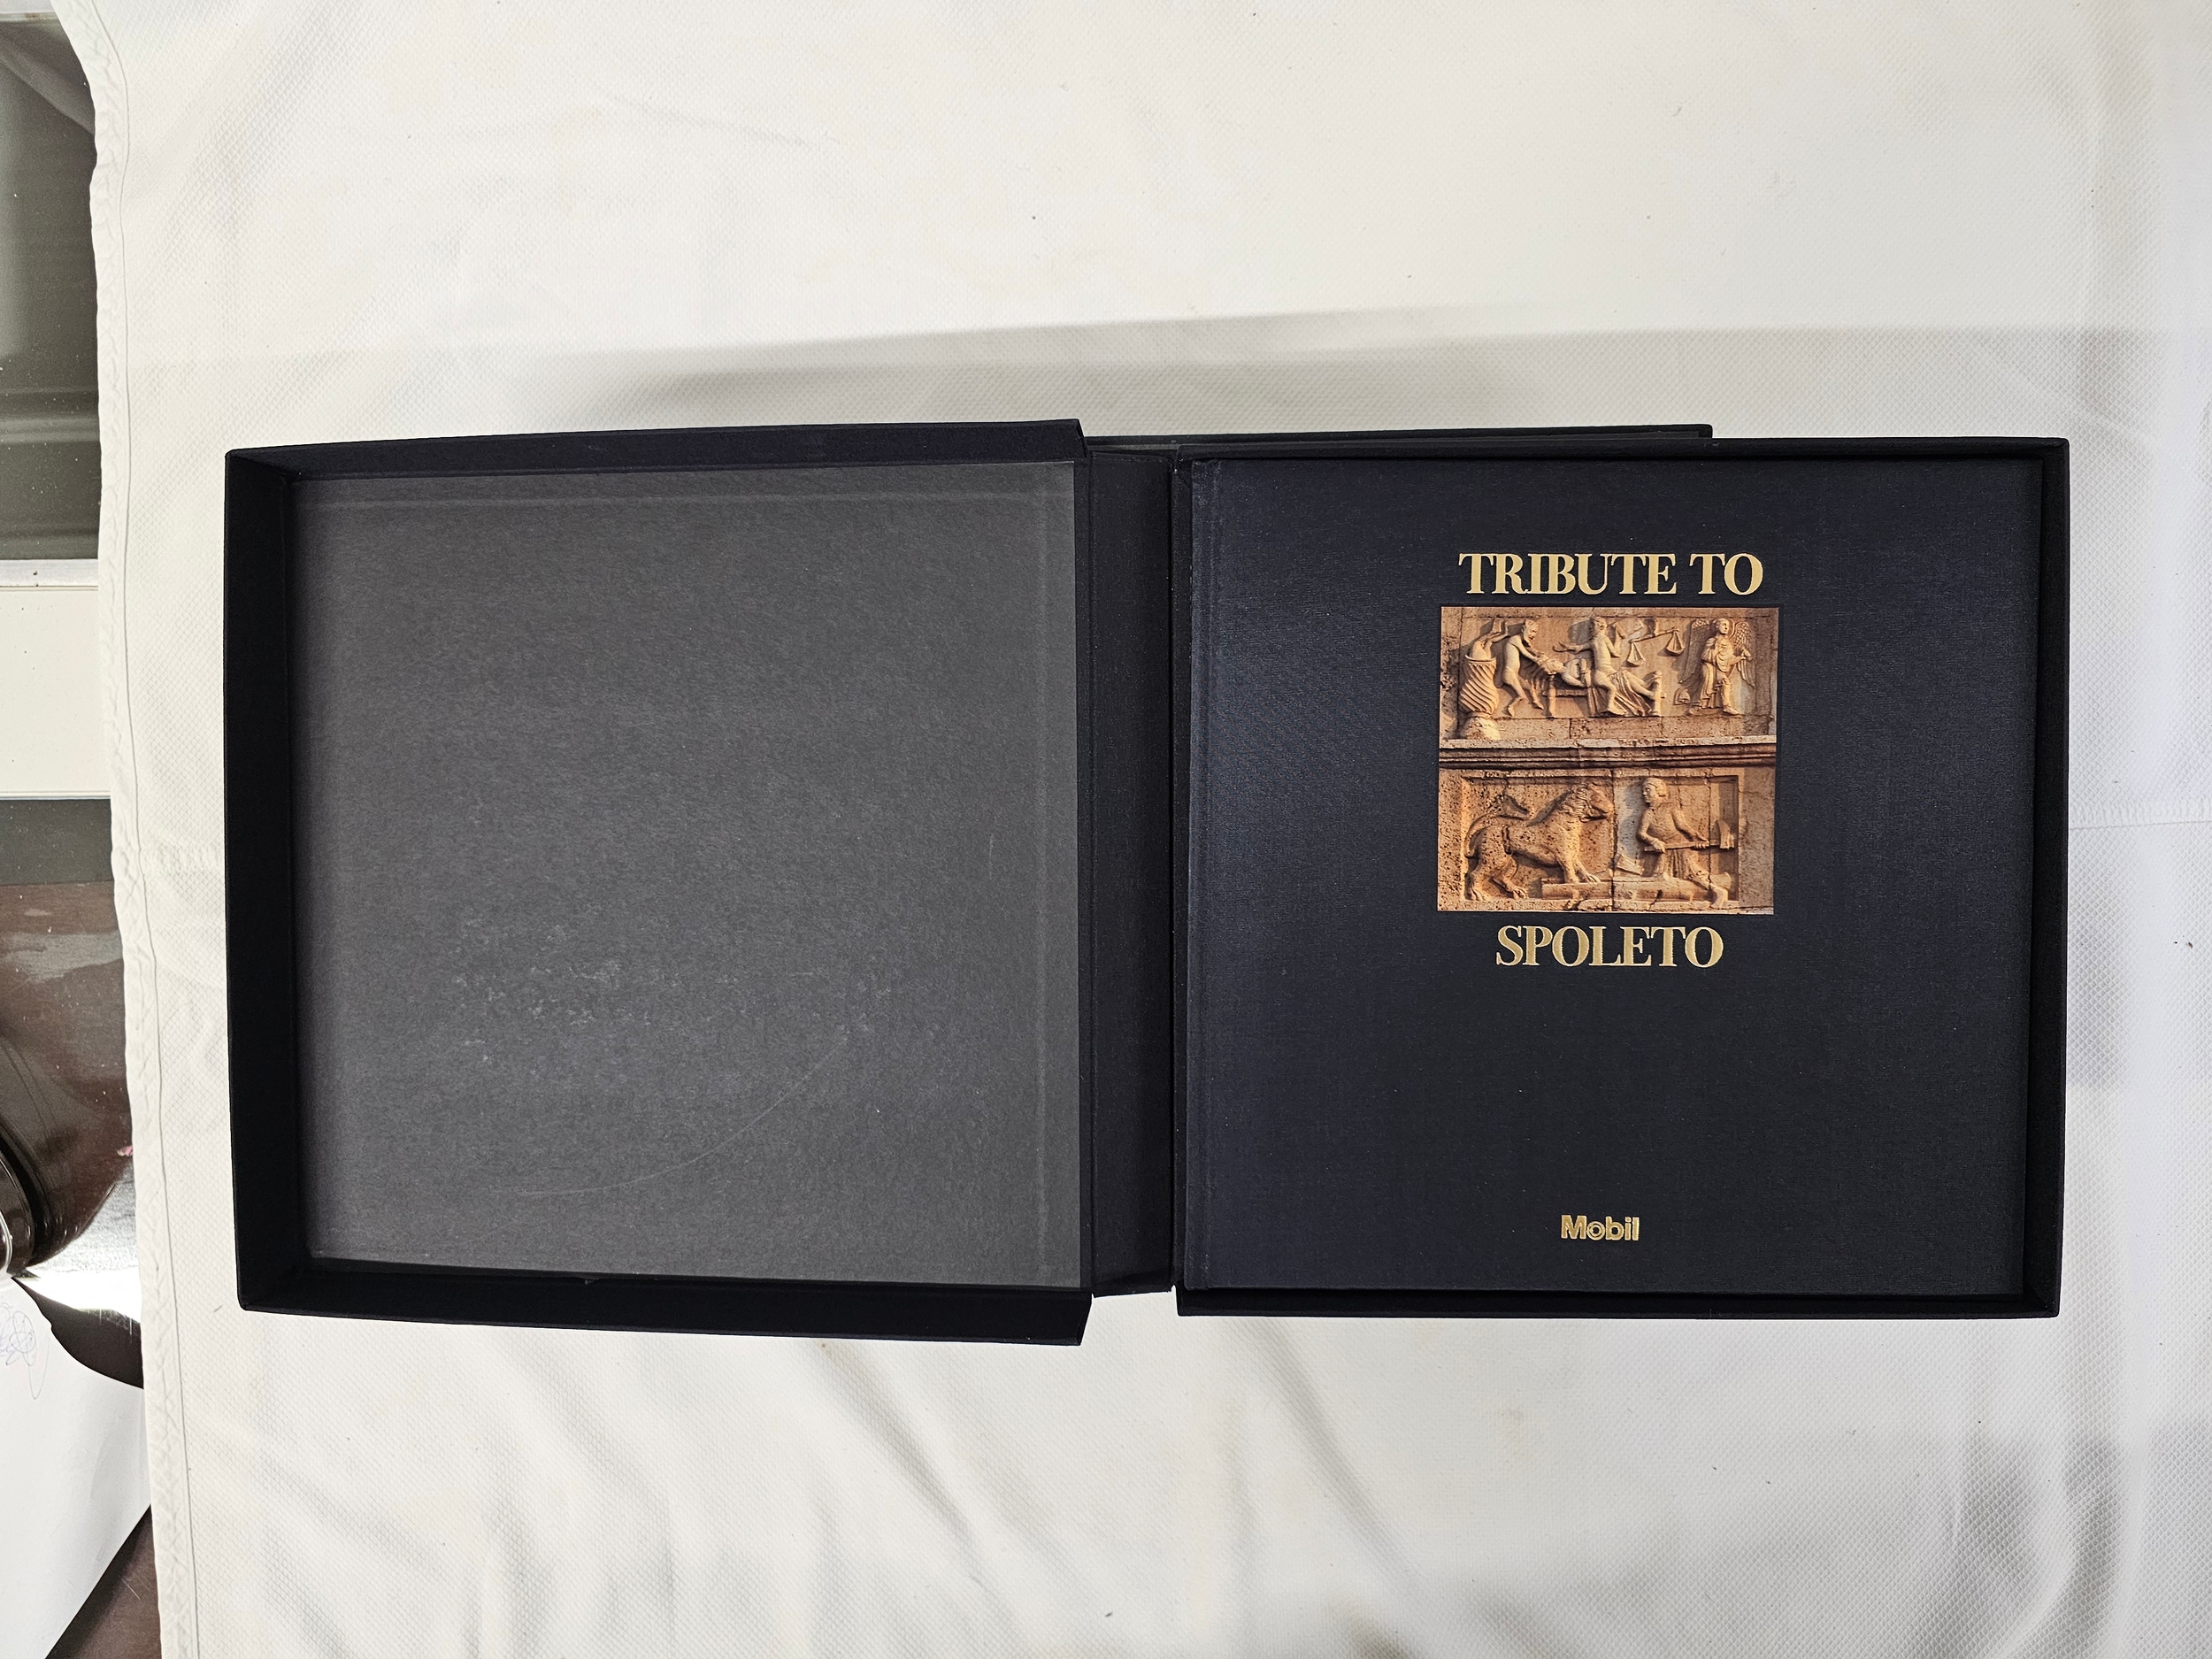 Franco Maria Ricci. A collection of five boxed and sealed books including Tribute to Spoleto. - Image 3 of 3